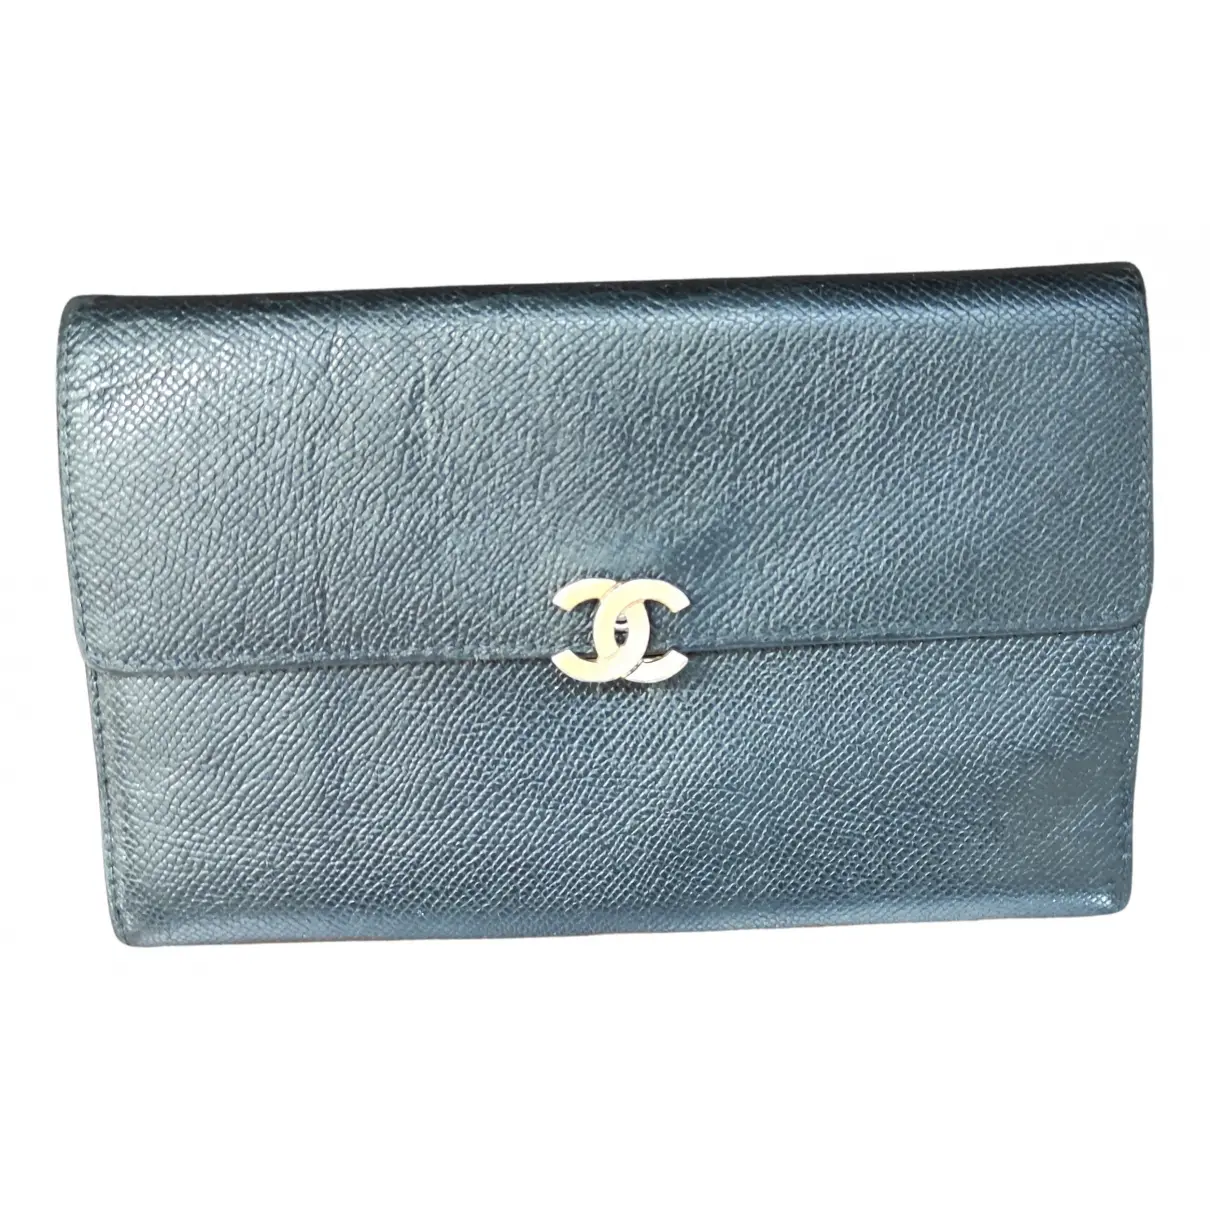 Leather clutch Chanel - Vintage